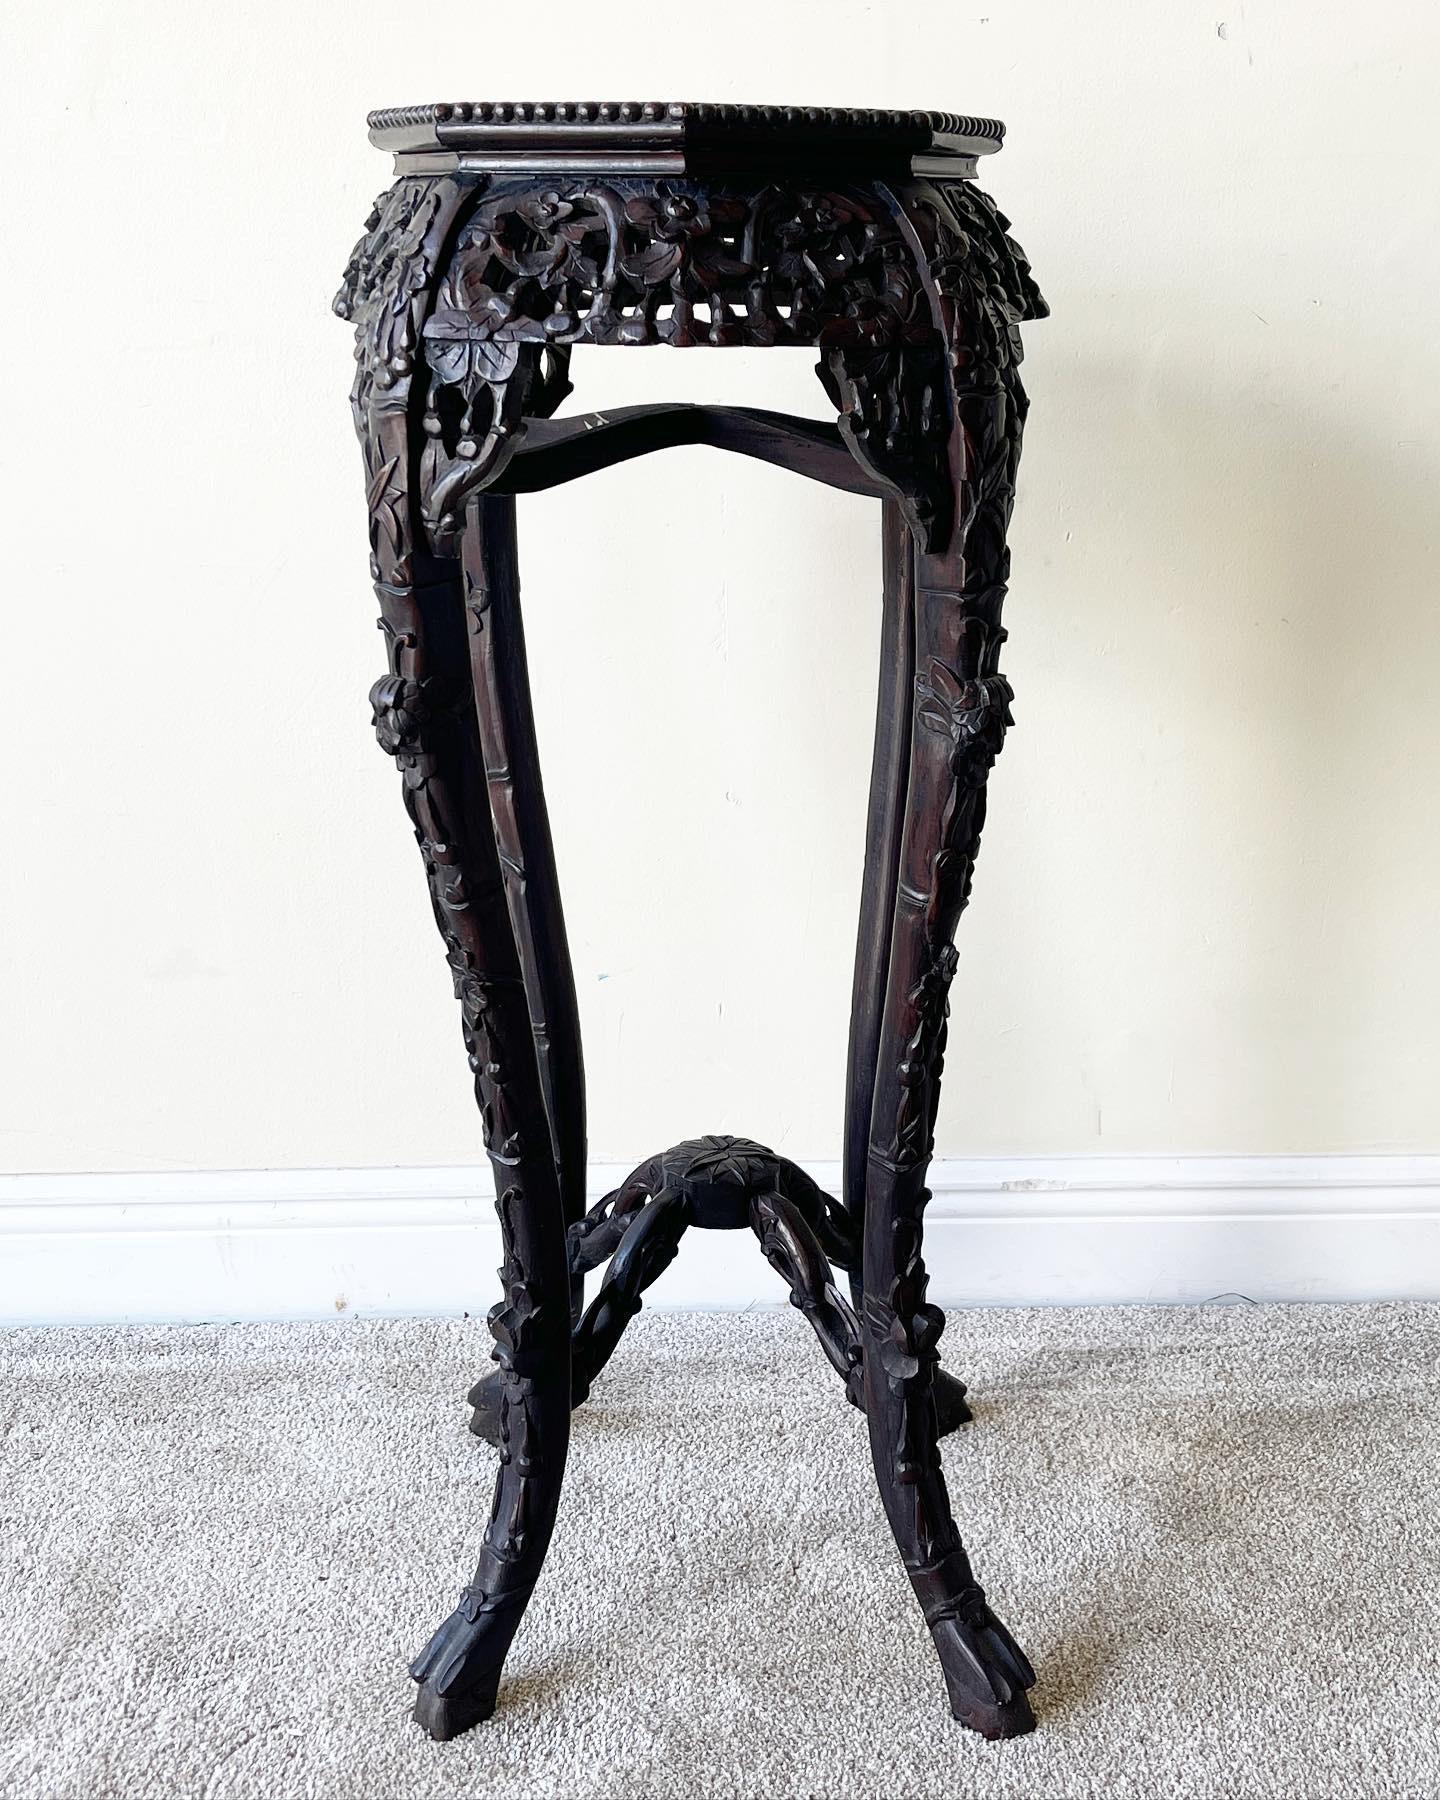 Octagonal Teakwood Stand with Pierced Carved Apron, And inset Marble Top. Cabriole Legs with Stretchers are all intricately carved with floral designs. Marked underneath the marble with Chinese writing/stamps

Table face measures
13x13x35”.